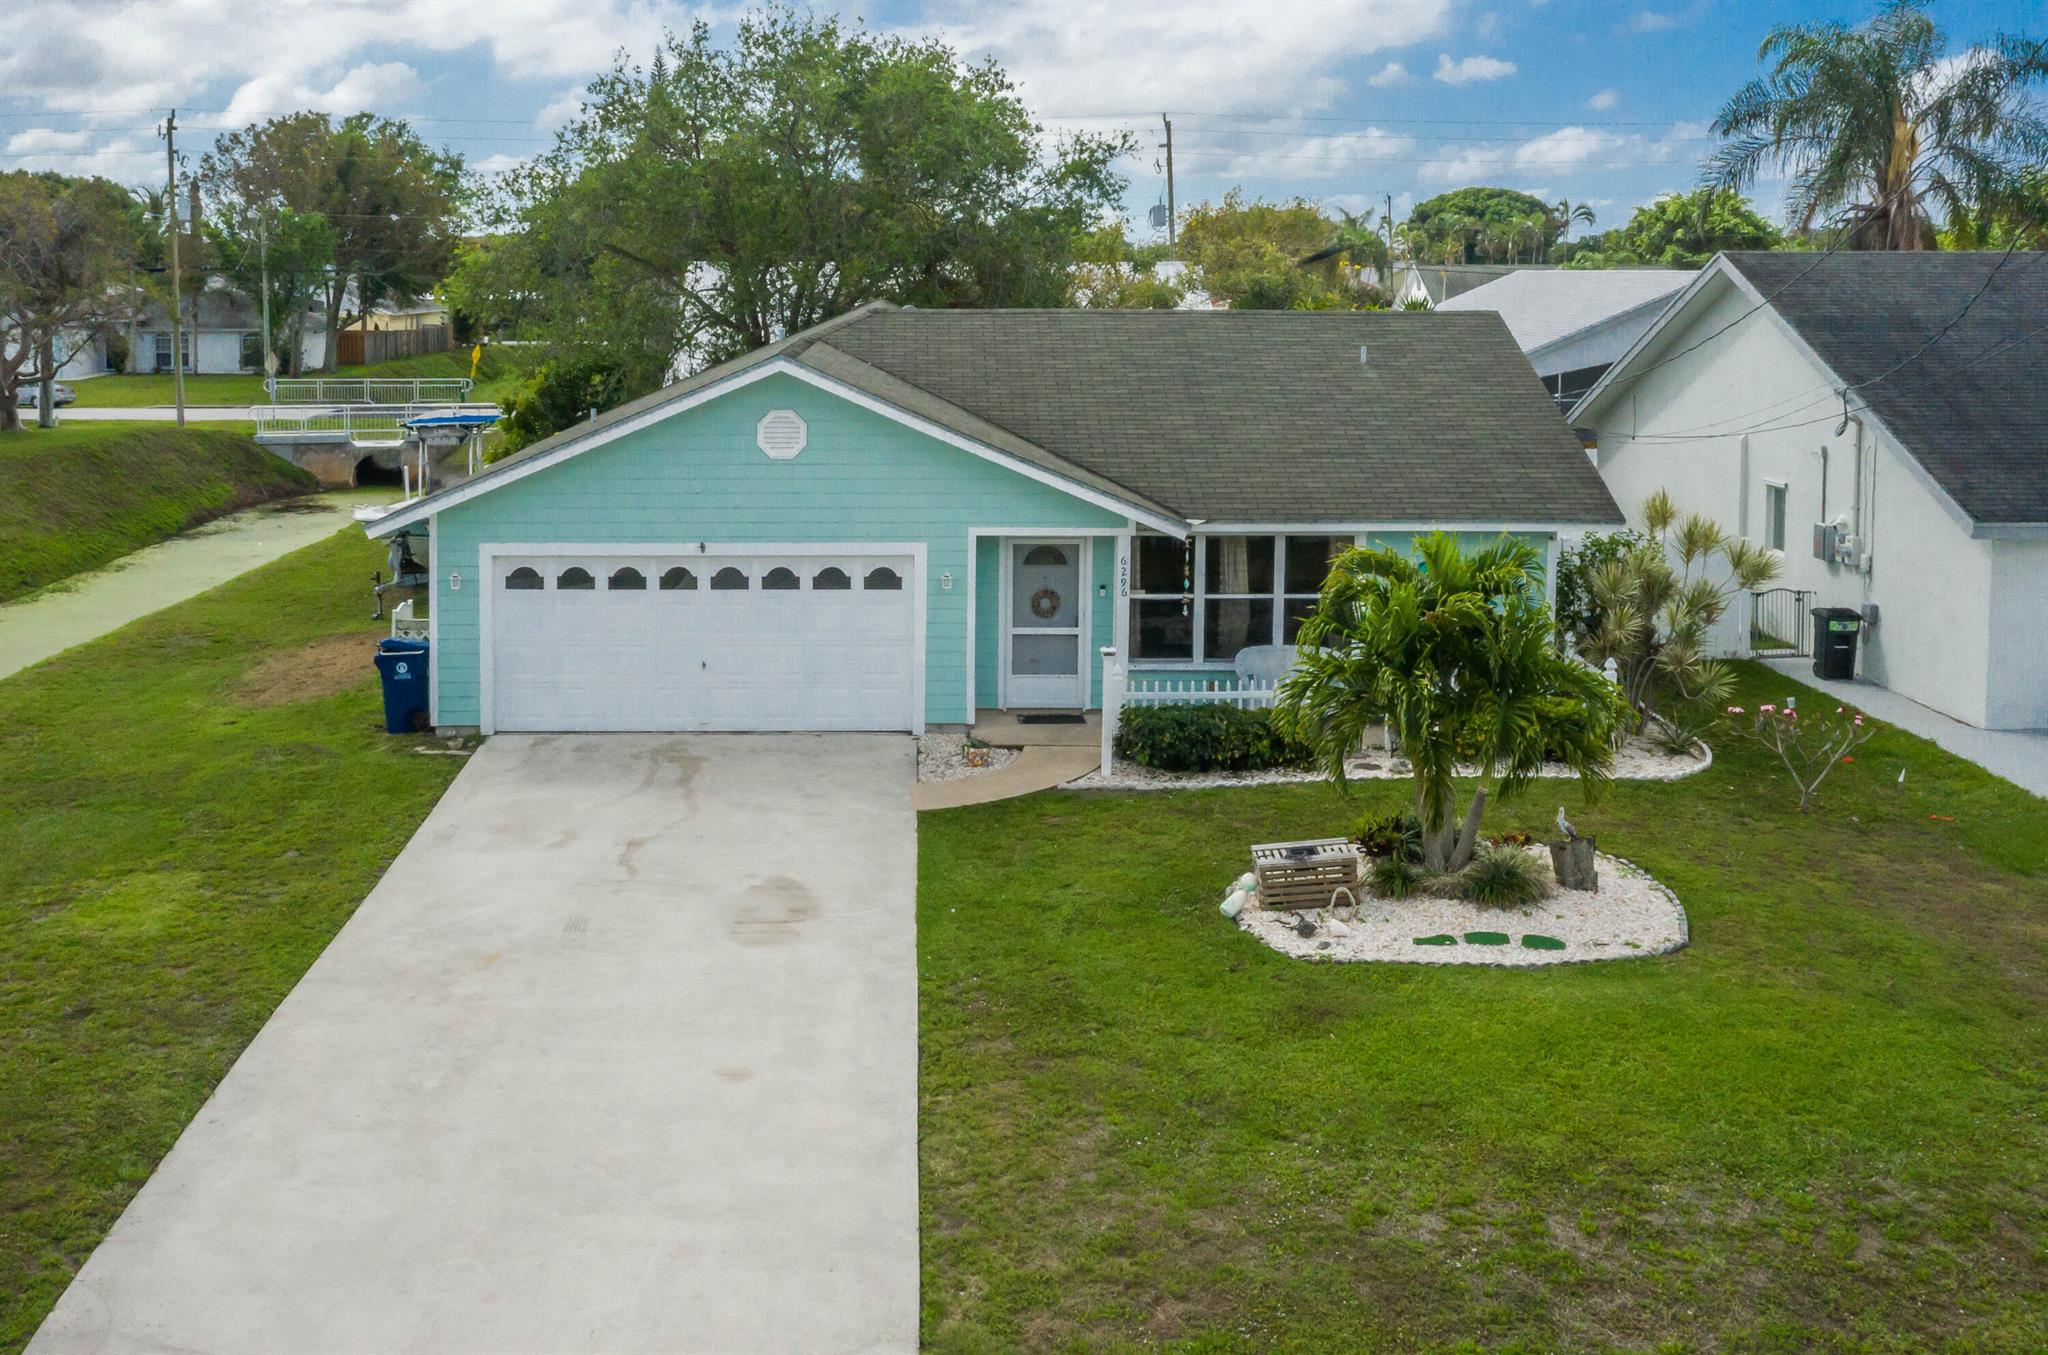 Assumable Mortgage of $260k with a great locked in rate. Prime location in Jupiter Florida alongside a Canal that allows for boat or RV storage.  The Heights in Jupiter, FL is known for its holiday themed streets and family oriented neighborhood.  The Non-HOA neighborhood has its own recreation park with excellent rated schools in Jupiter.  Less than 5 miles from the beach and a golf cart ride away from Abacoa Towncentre, Roger Dean Stadium and Abacoa golf course this location is pristine for all age groups.  PVC fenced in back yard to bring your pets or enjoy some outdoor privacy.  The home includes shutters for hurricane protection and to maximize your insurance deductions.  Blown in insulation added on top of existing insulation in the attic to bring down energy cost.